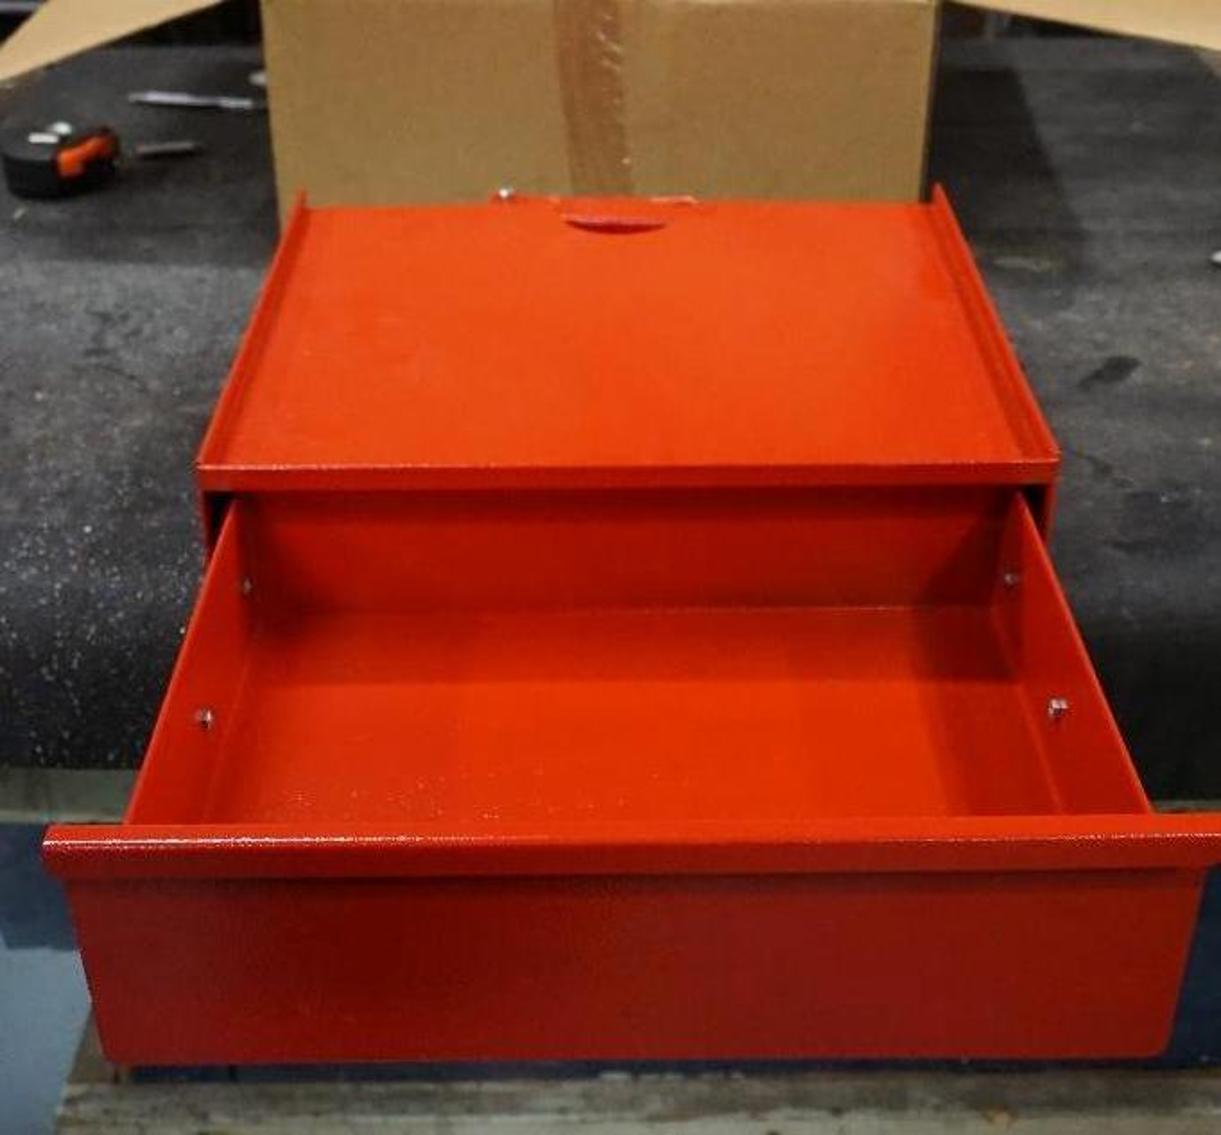 Car Dolly, Custom Made Building, and New 20-Gauge Steel Drill Press Tool and Bit Drawers